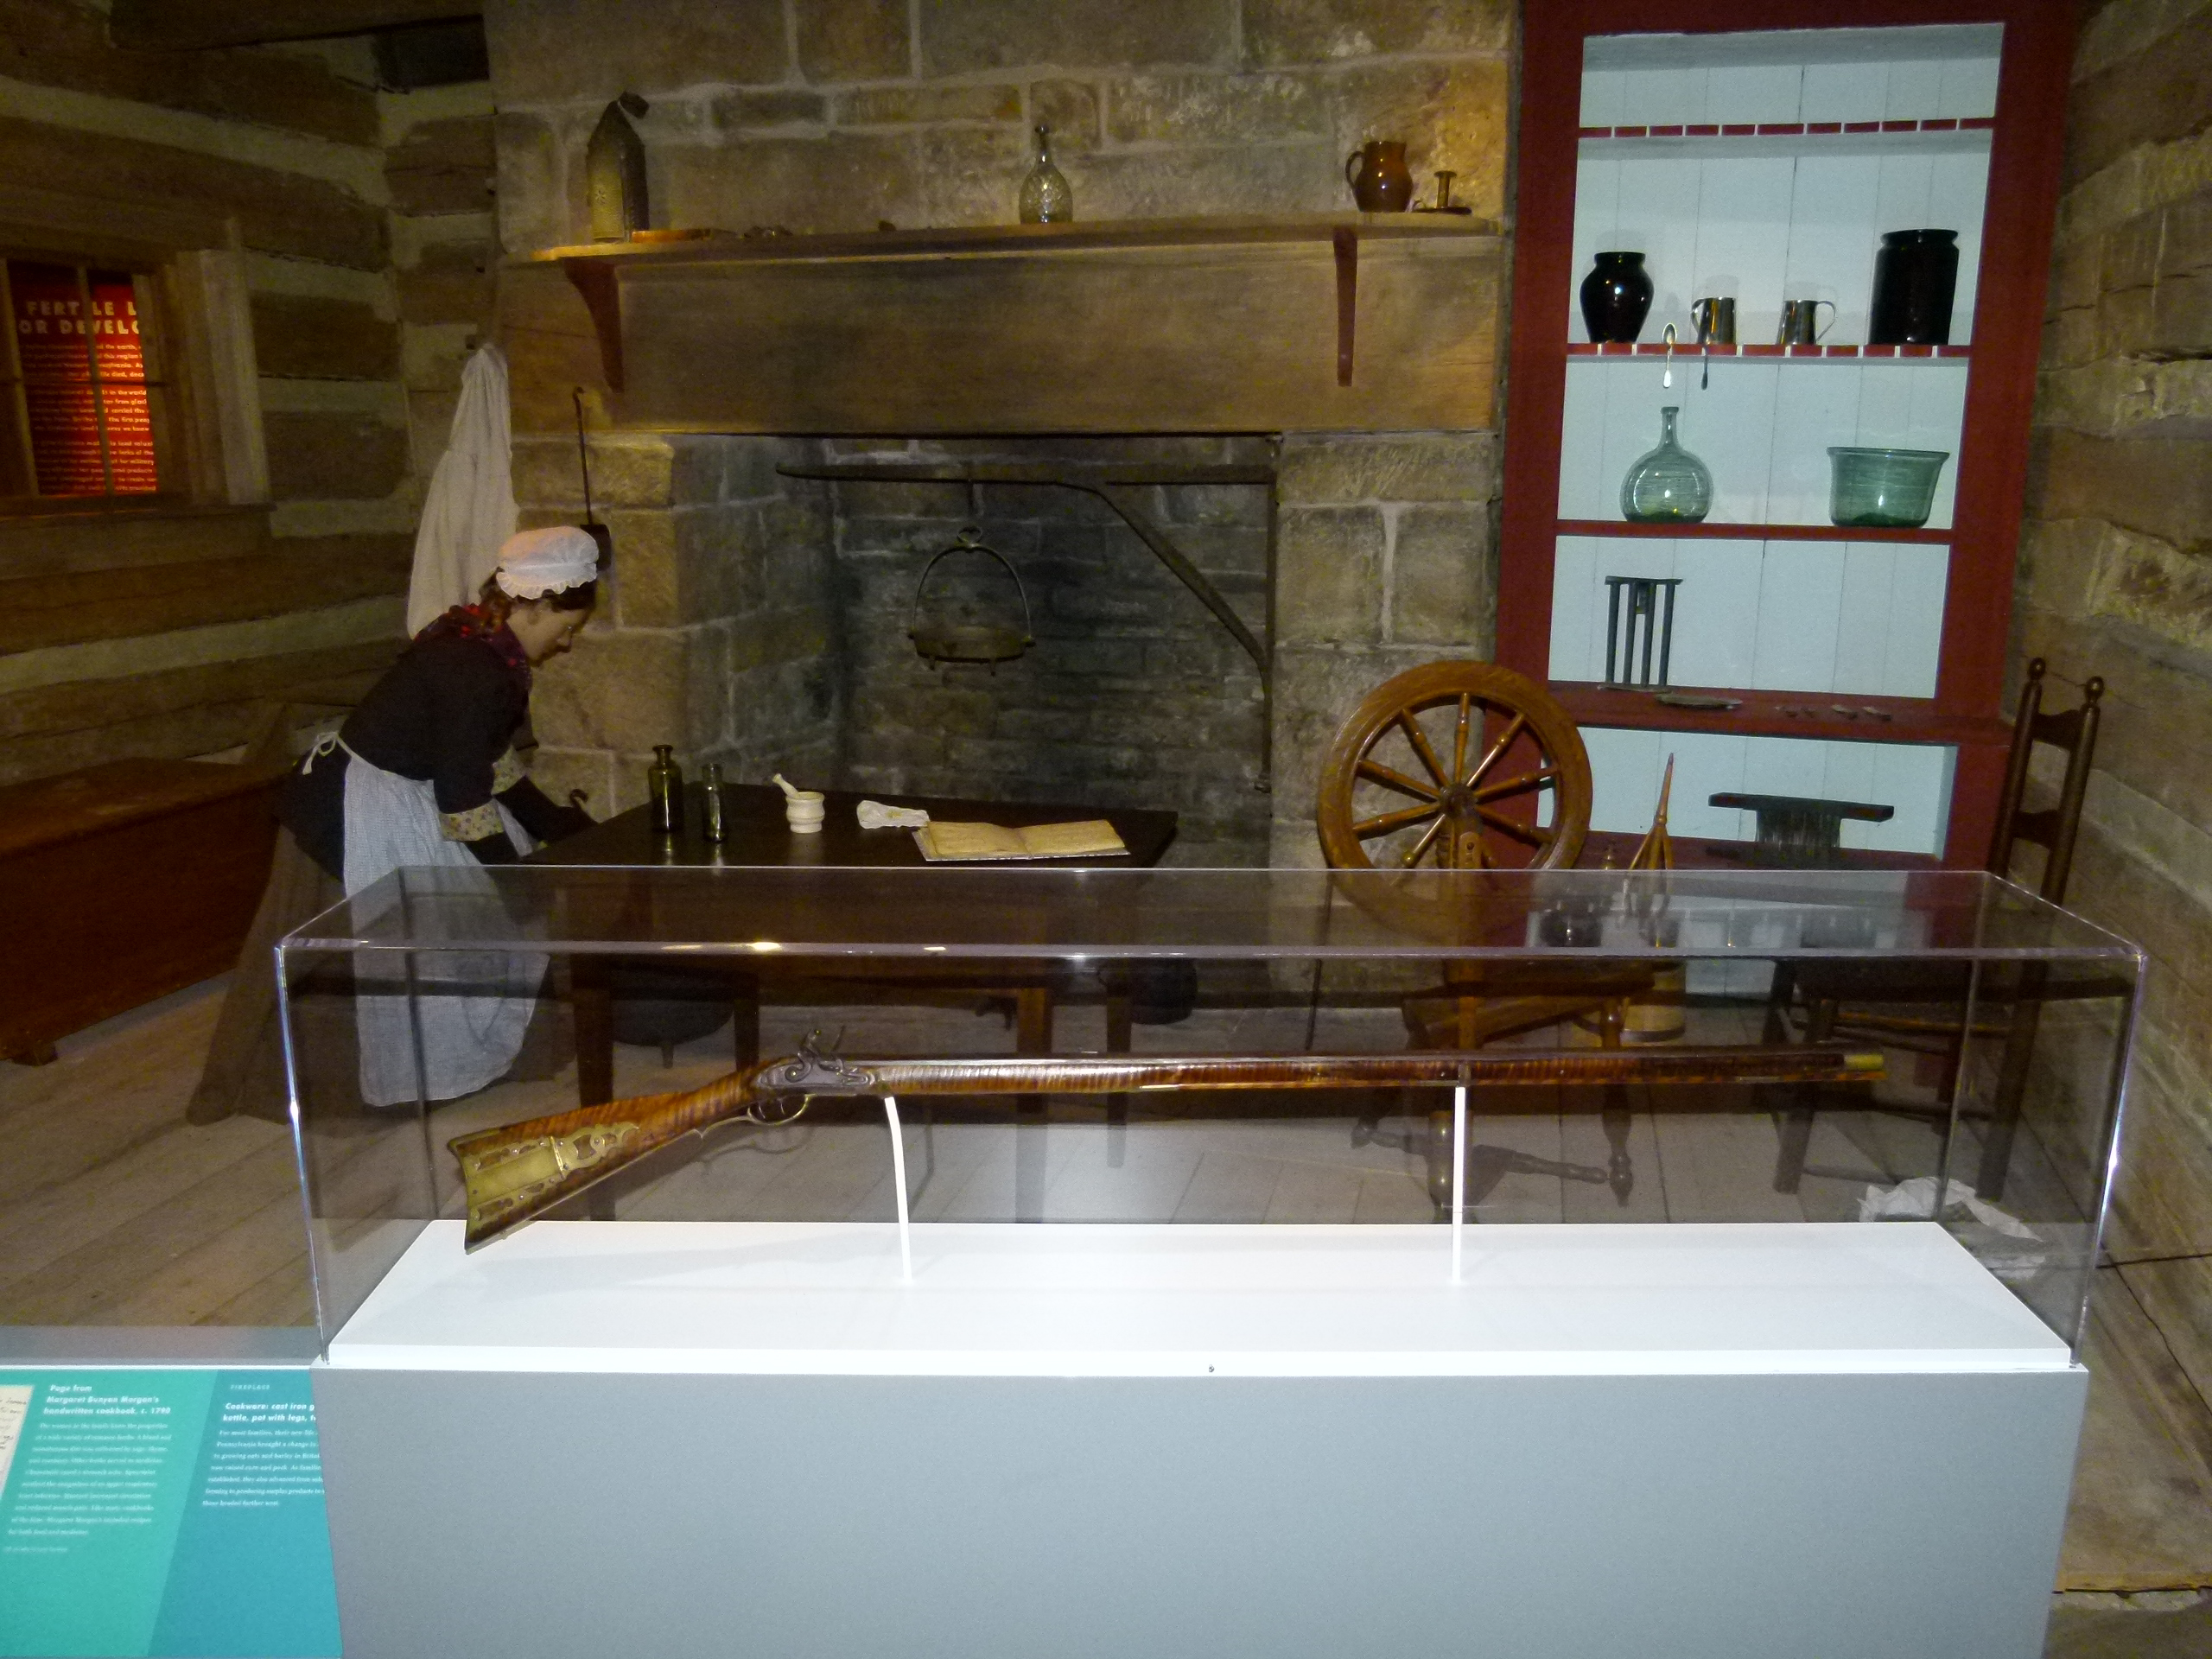 An early American home interior with a hearth, spinning wheel, and long gun.